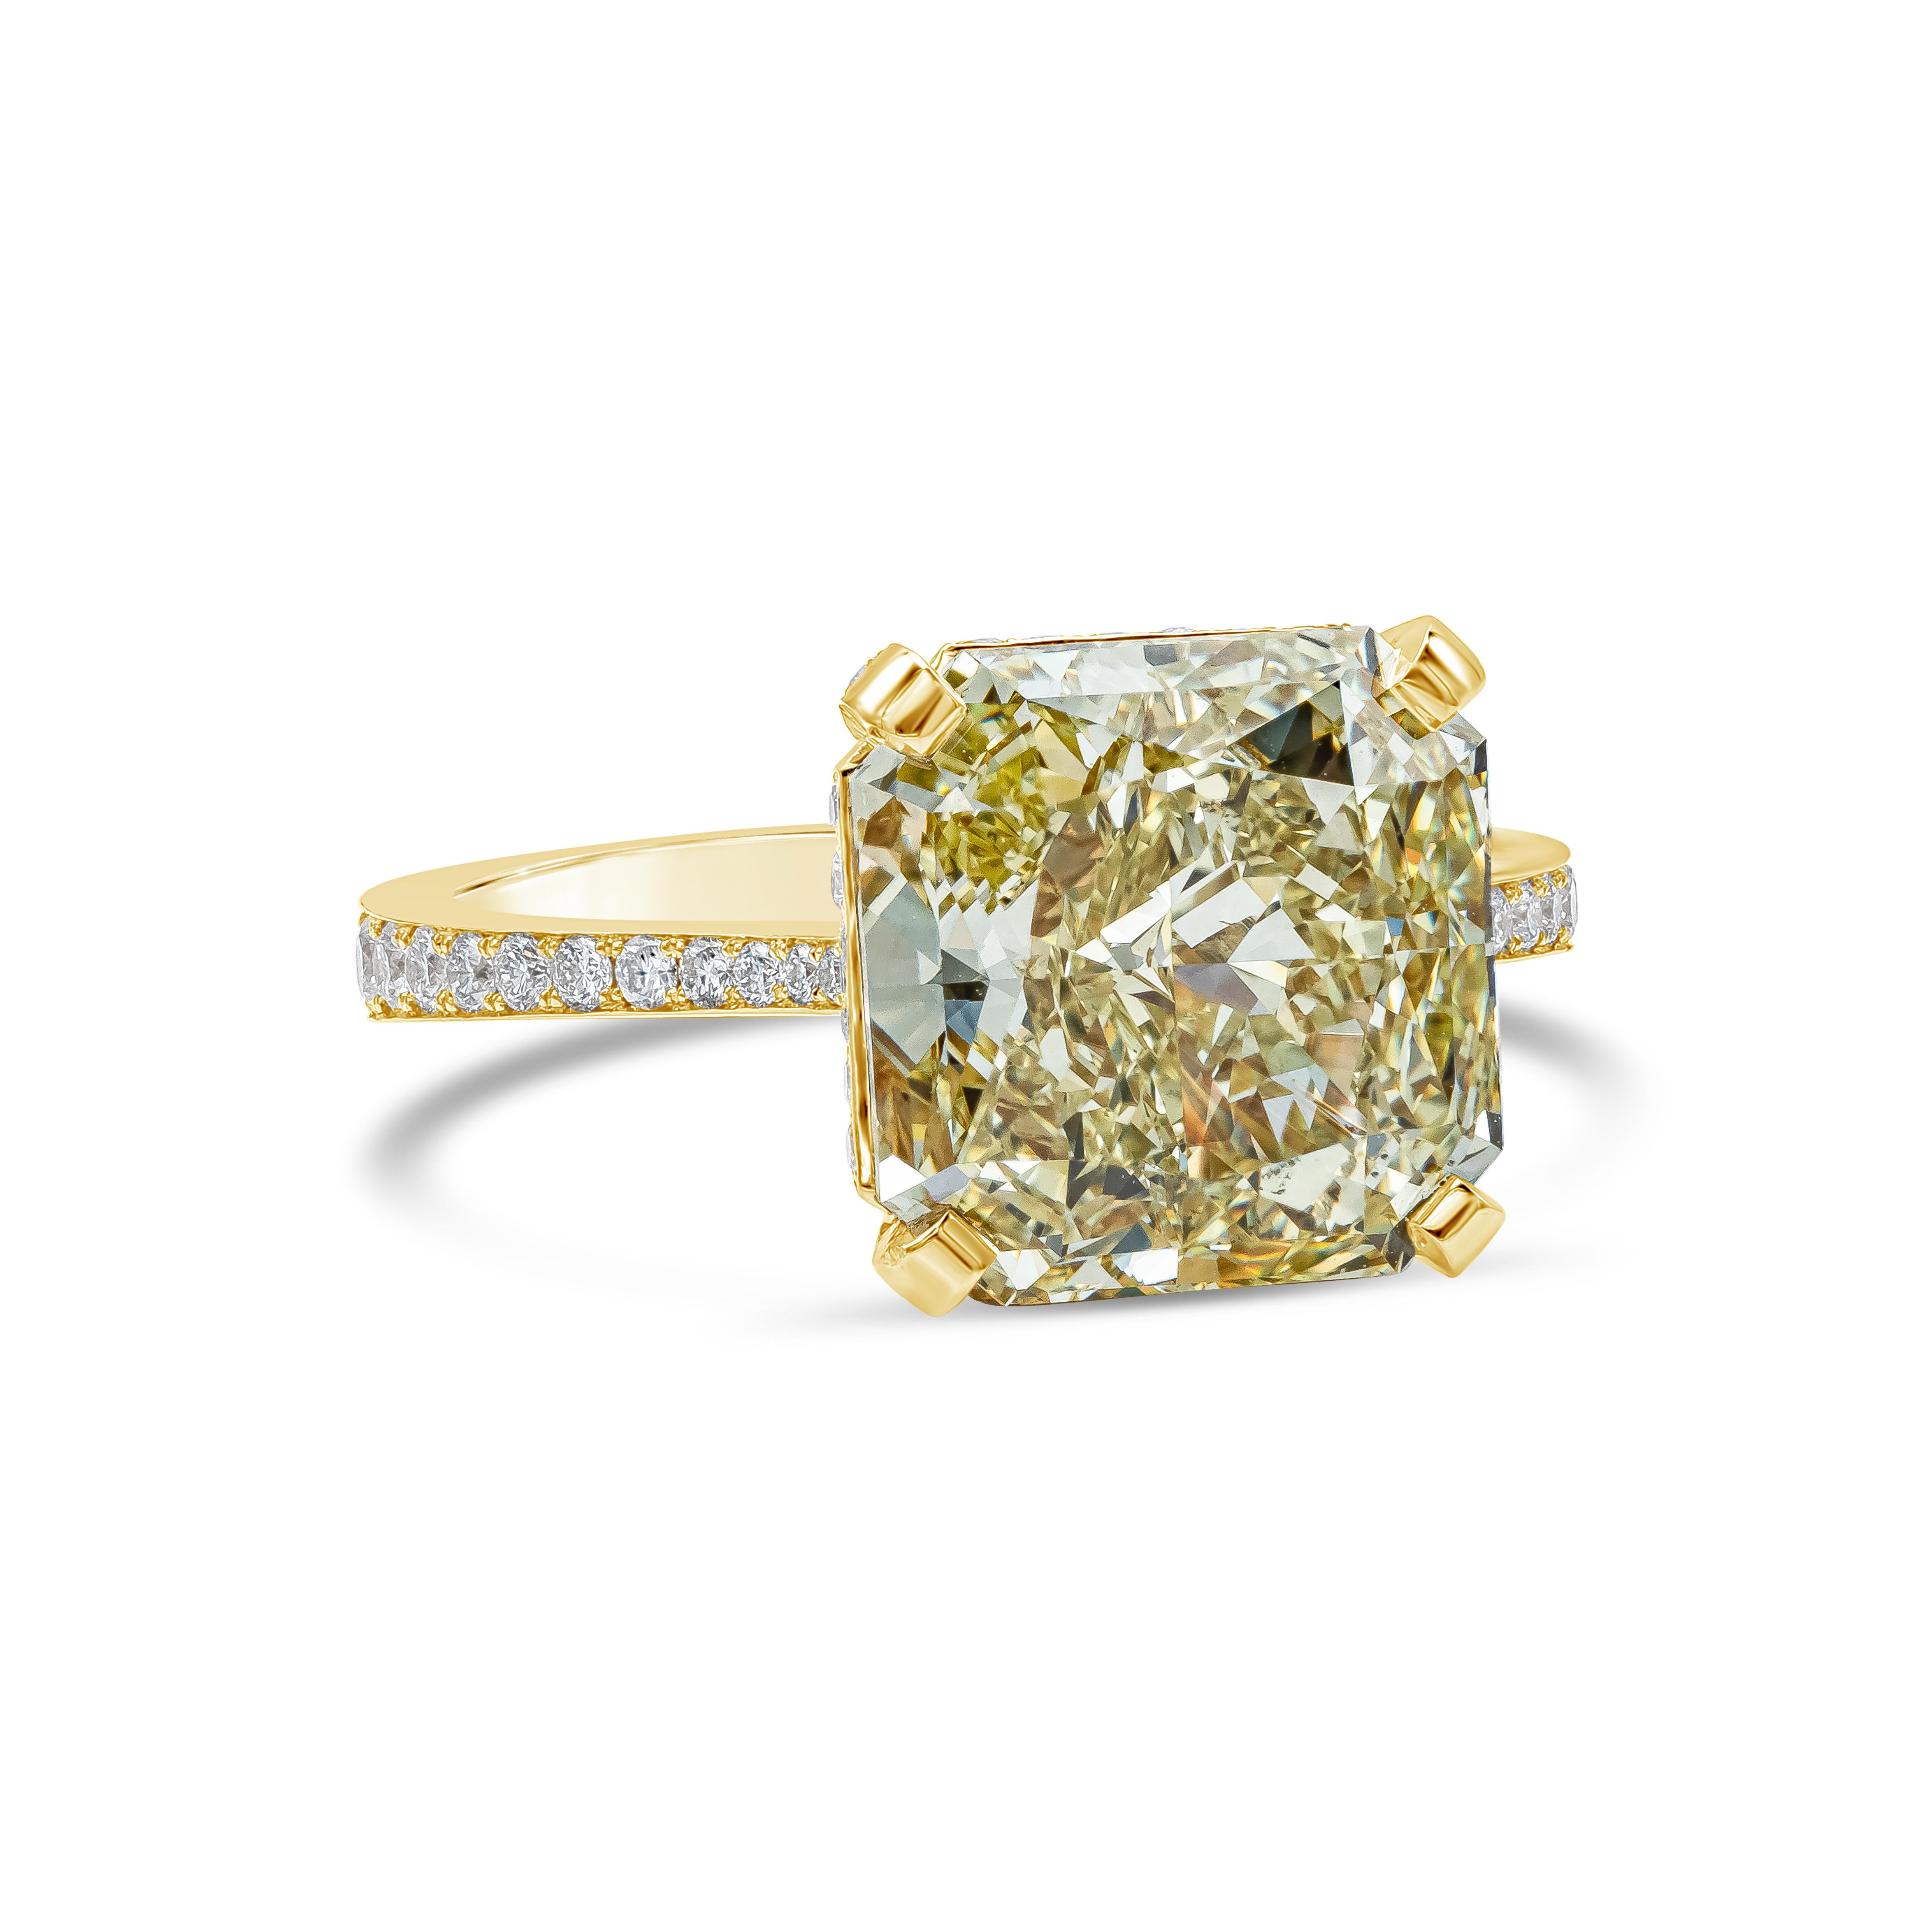 A classic and color-rich pave engagement ring showcasing a vibrant GIA certified 6.54 carat radiant cut fancy yellow diamond, VS2 in clarity, set in a four prong 18k yellow gold basket. Accented by 88 pieces of brilliant round diamonds from gallery